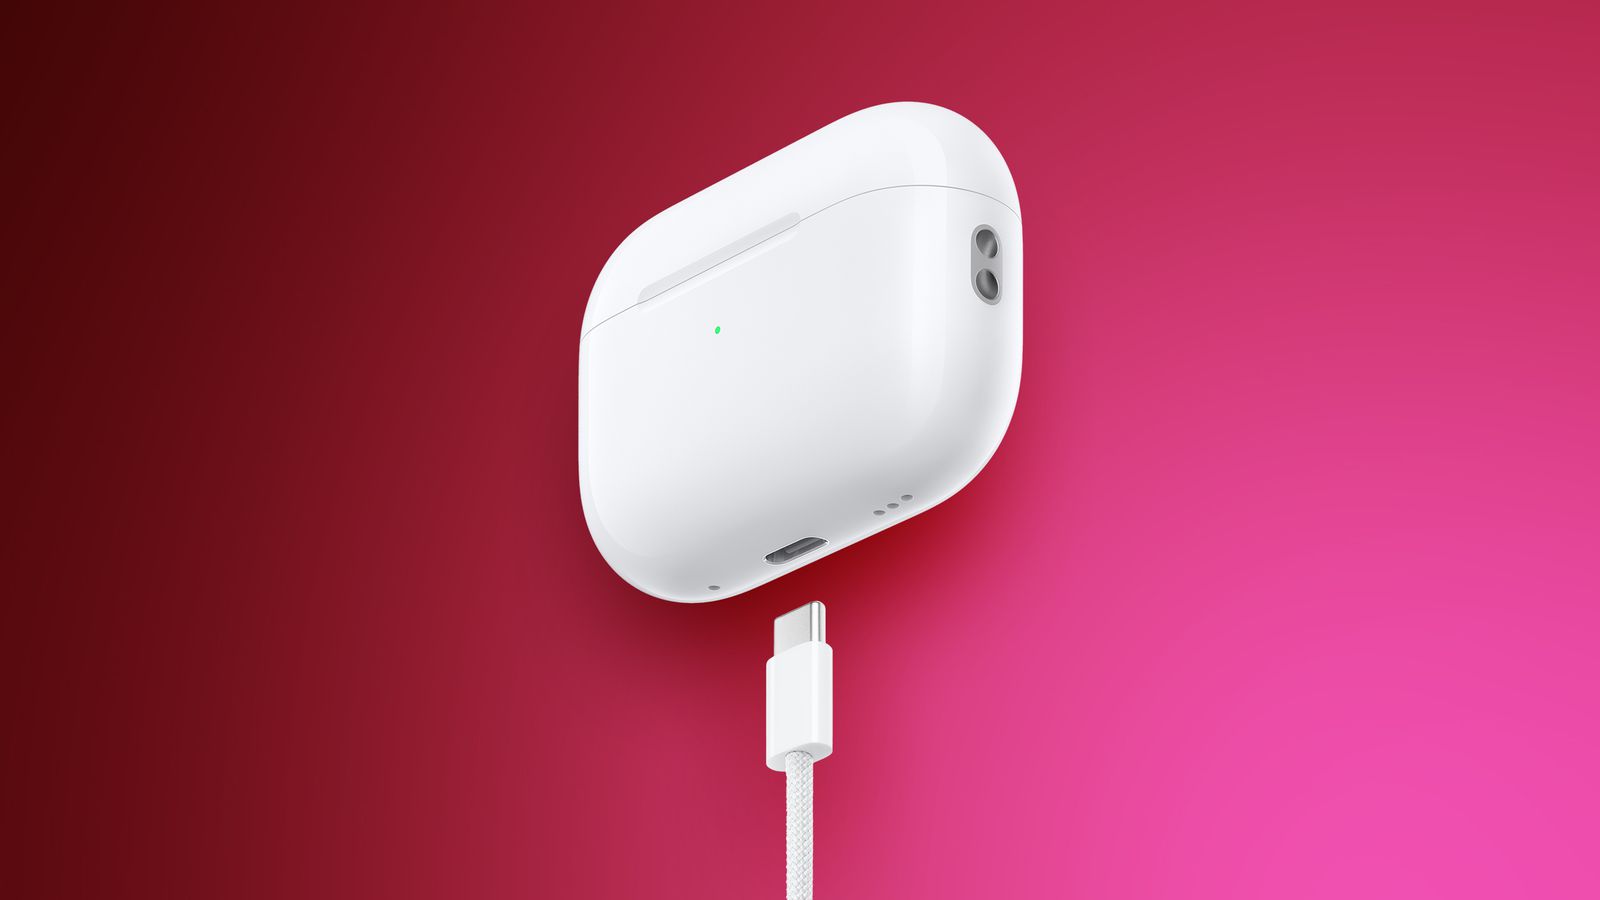 Get the New AirPods Pro 2 With USB-C for $199.99 Thanks to